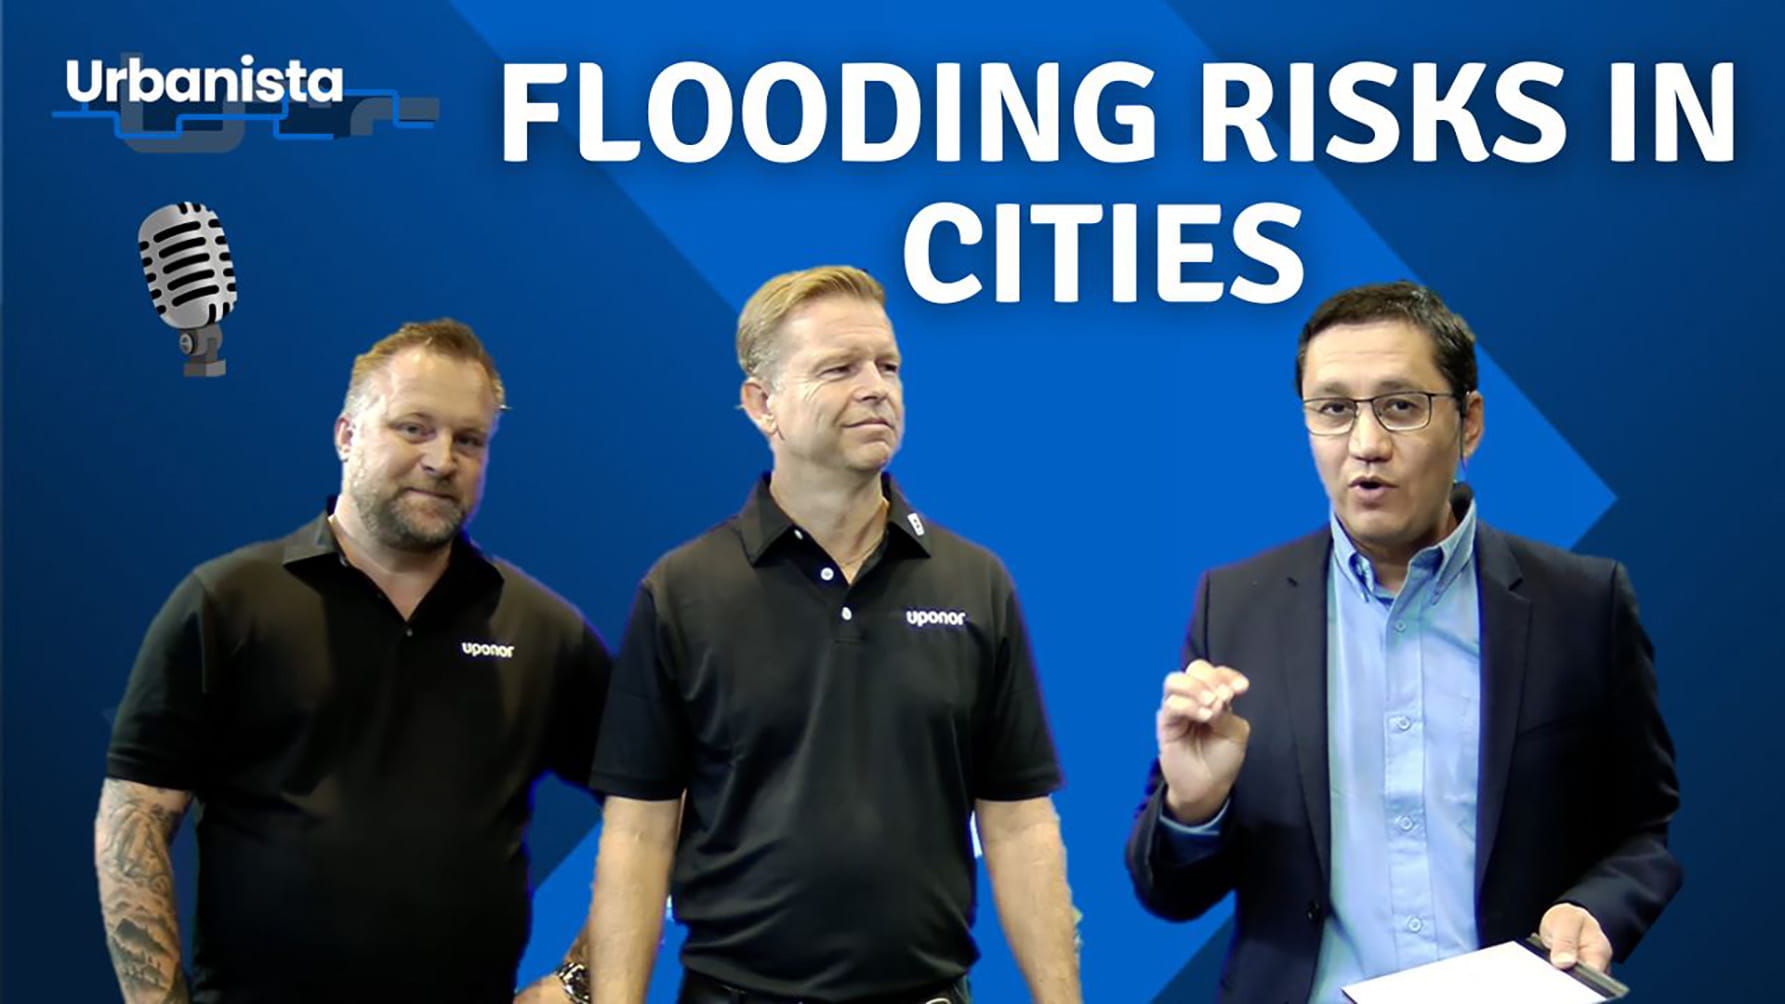 Reduce flooding risk in cities in a sustainable way